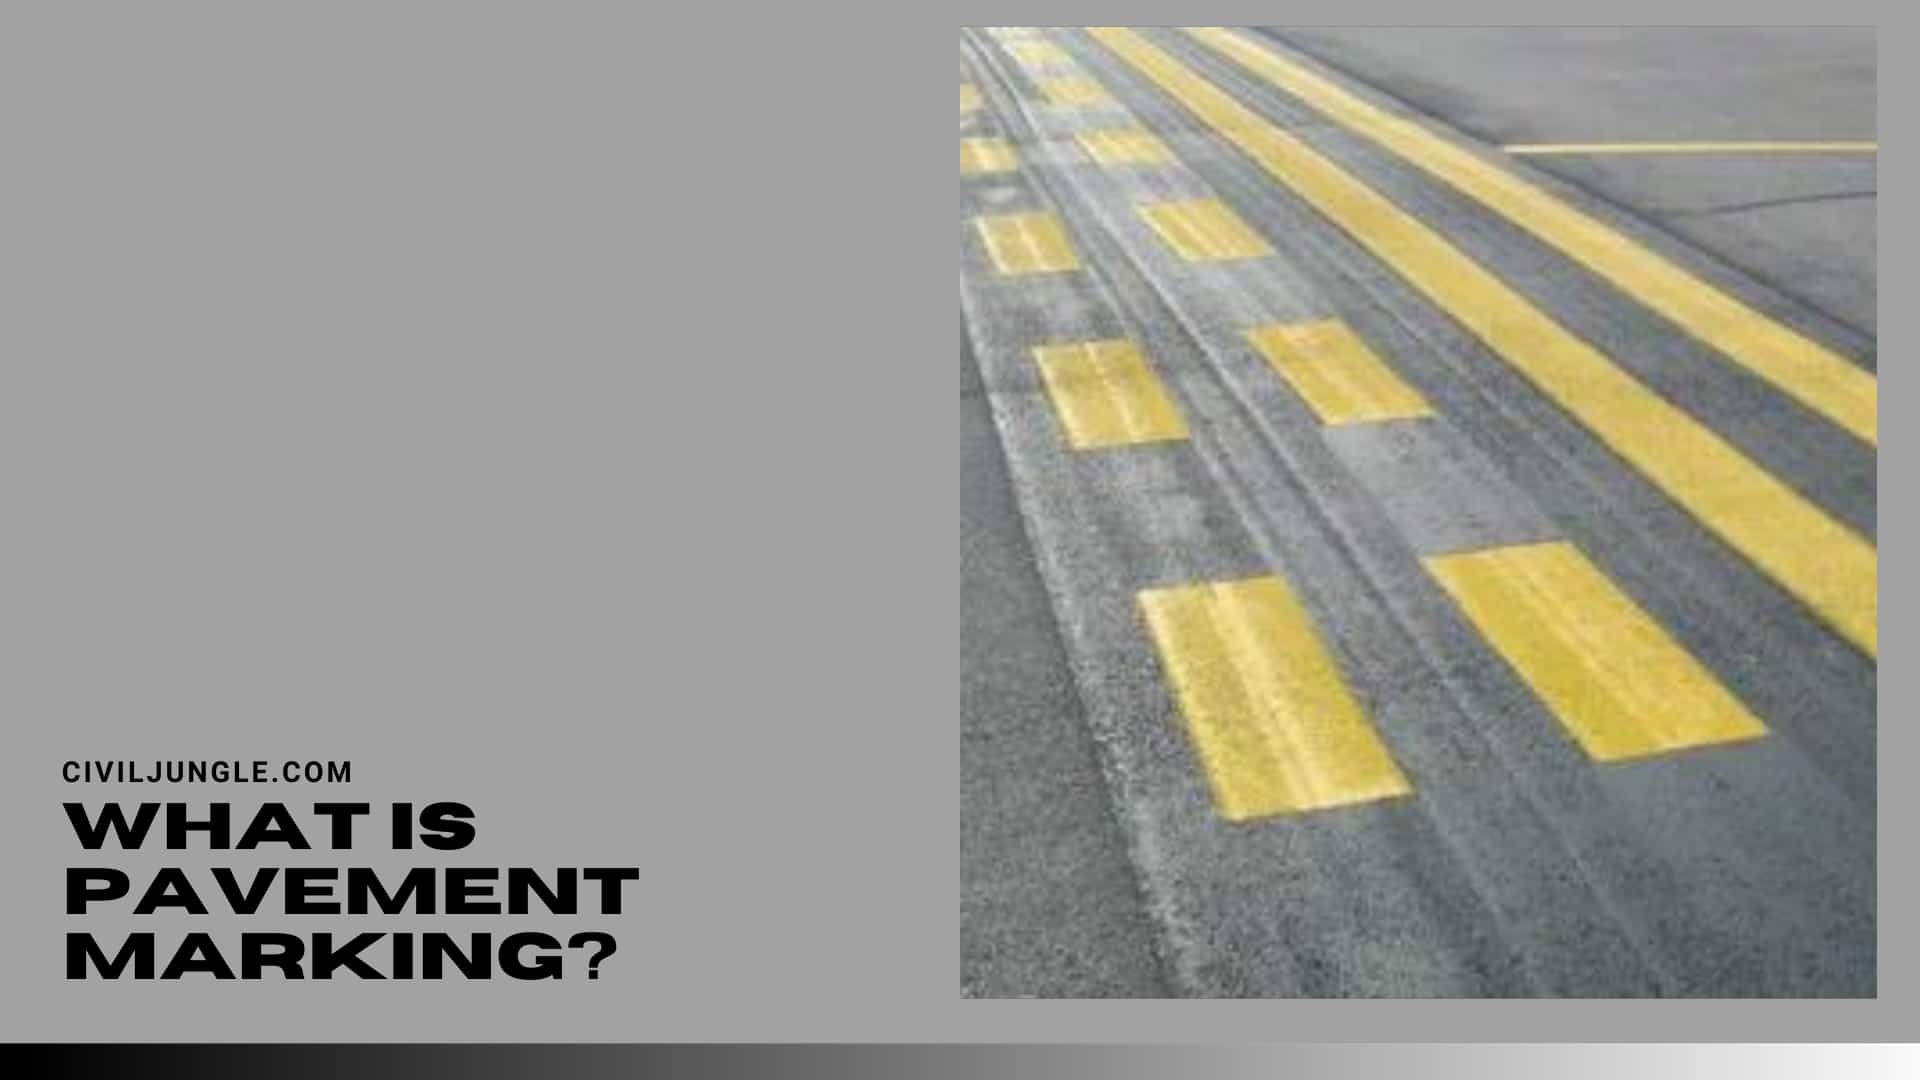 What Is Pavement Marking?